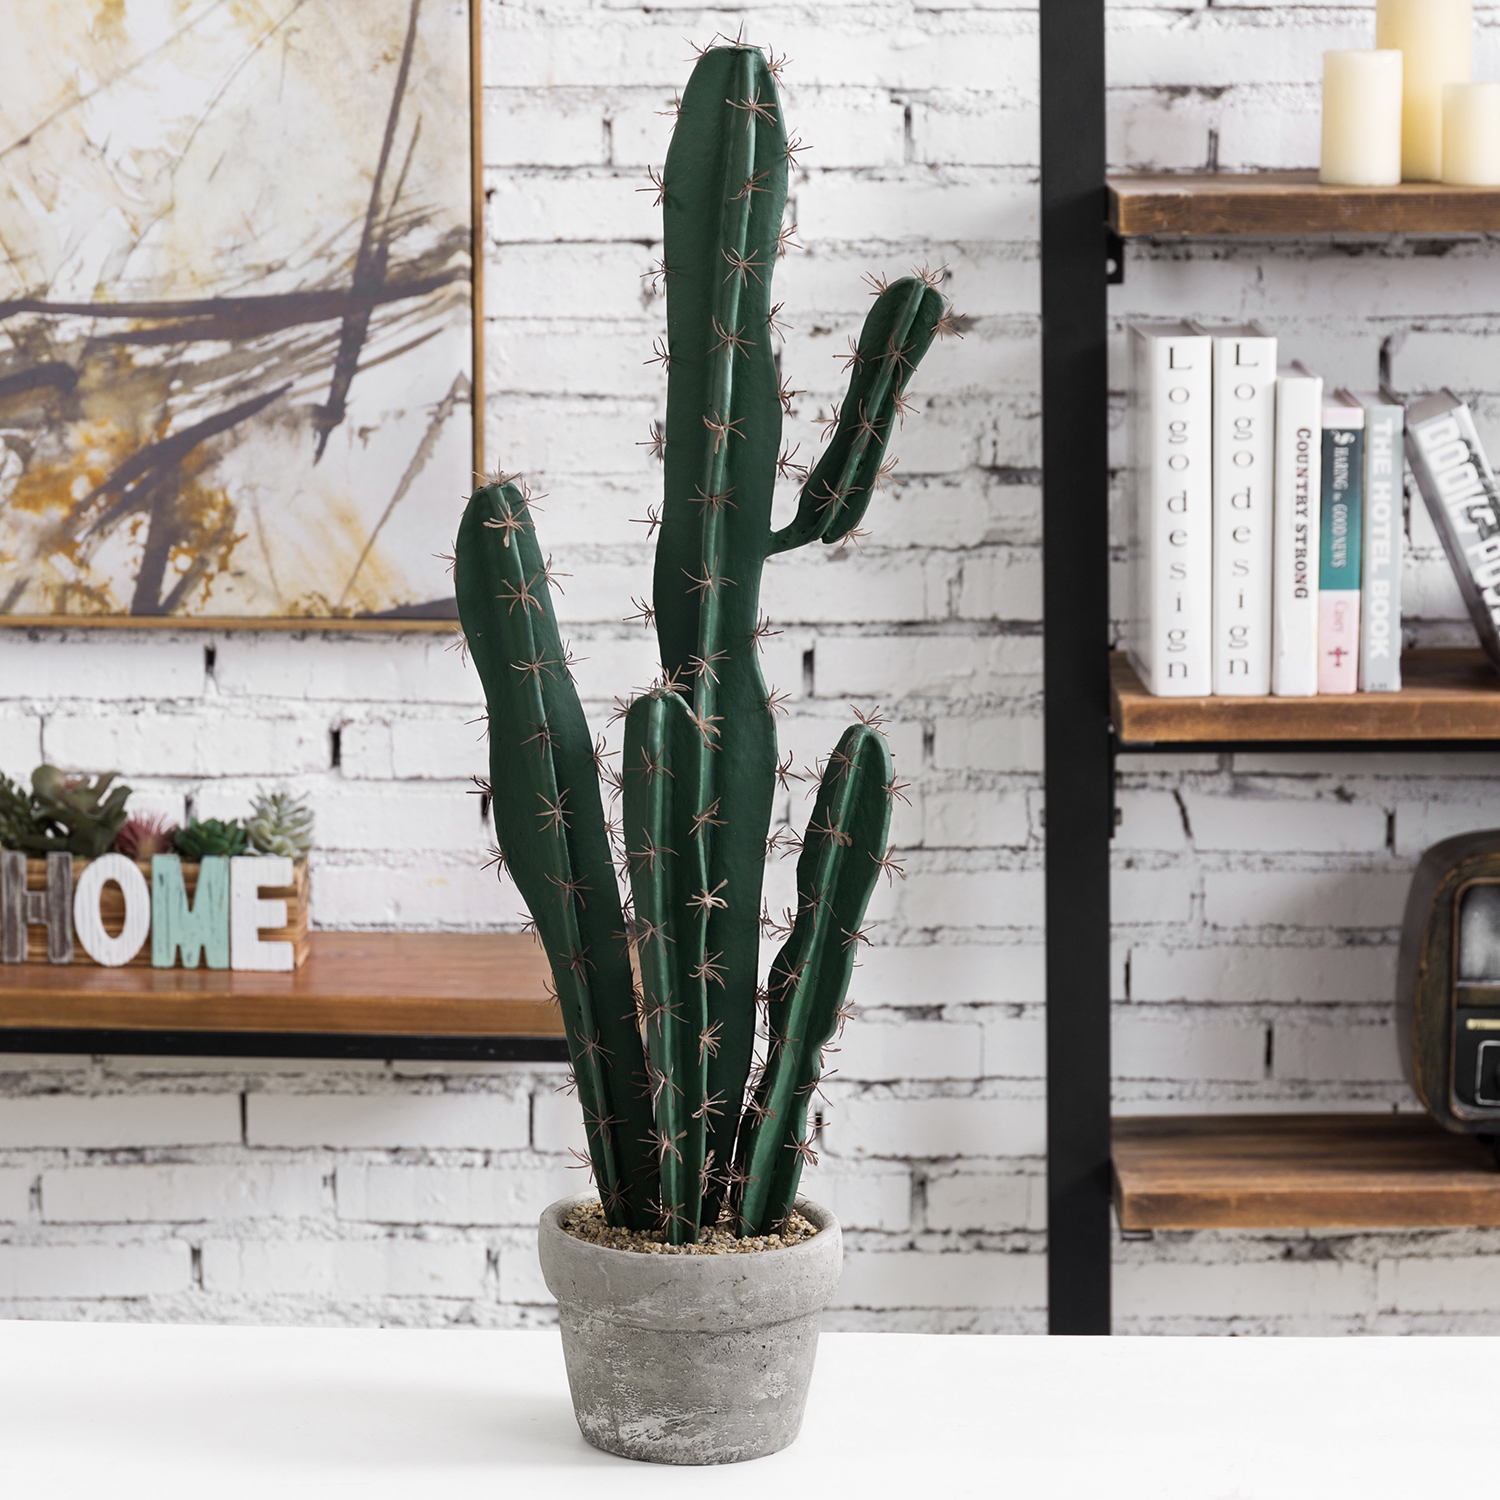 MyGift 30 Inch Artificial Potted Saguaro Cactus Plant in Gray Cement ...